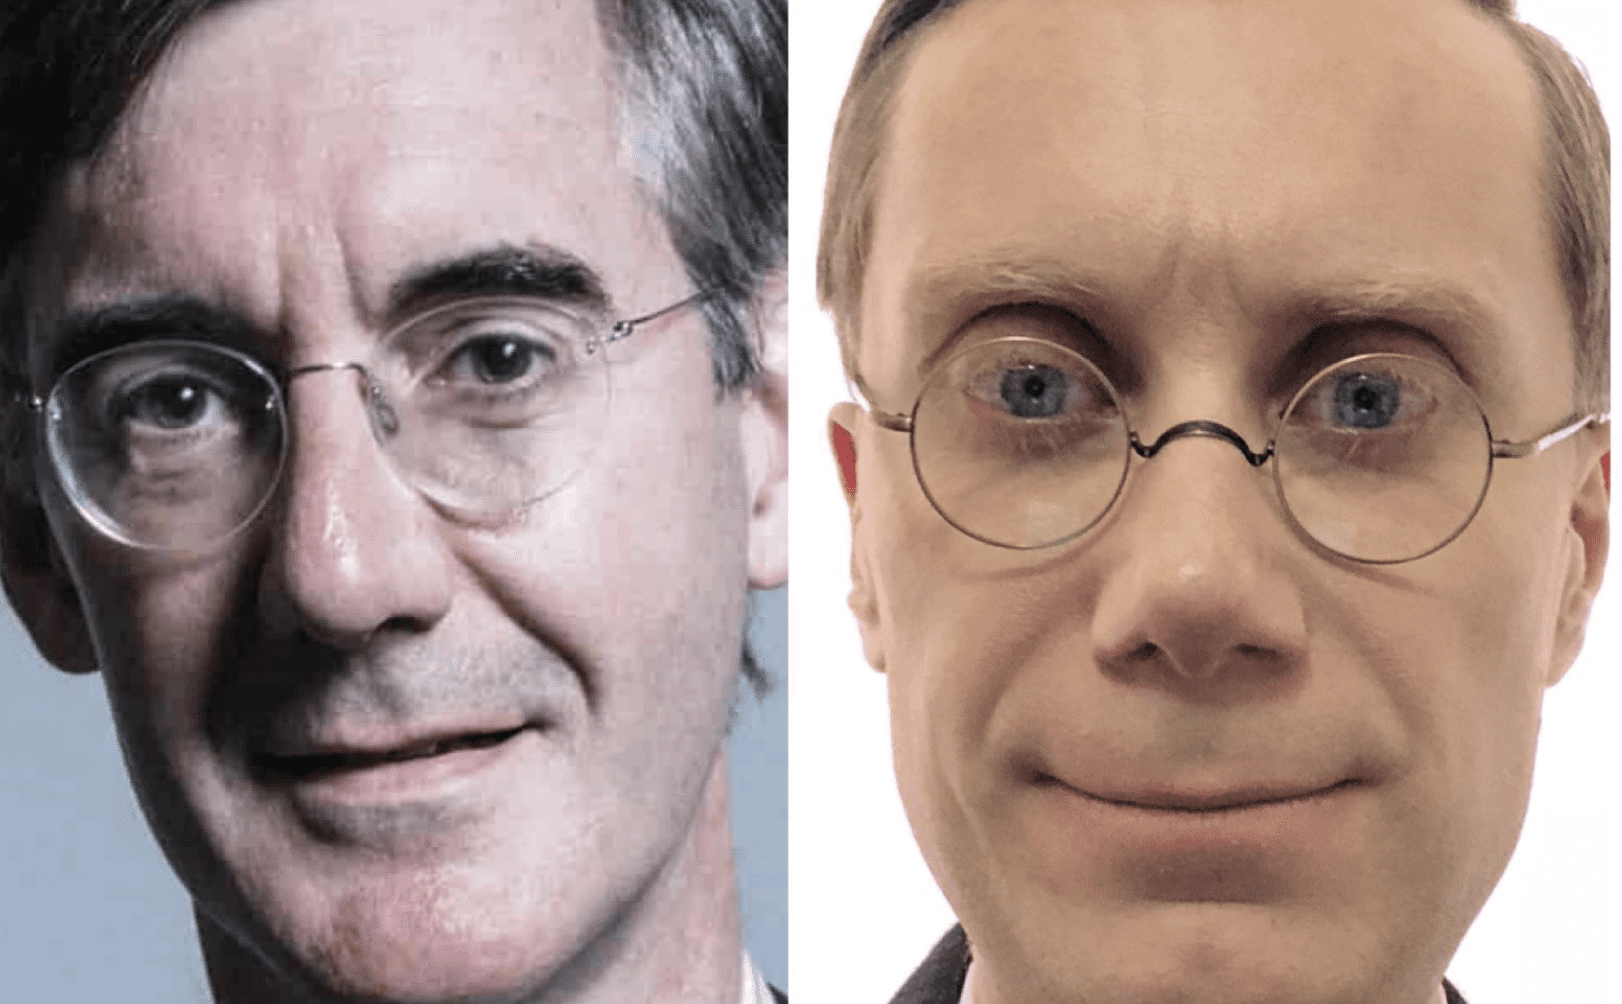 Stephen Merchant offered to play Rees-Mogg and the rest of cast came together